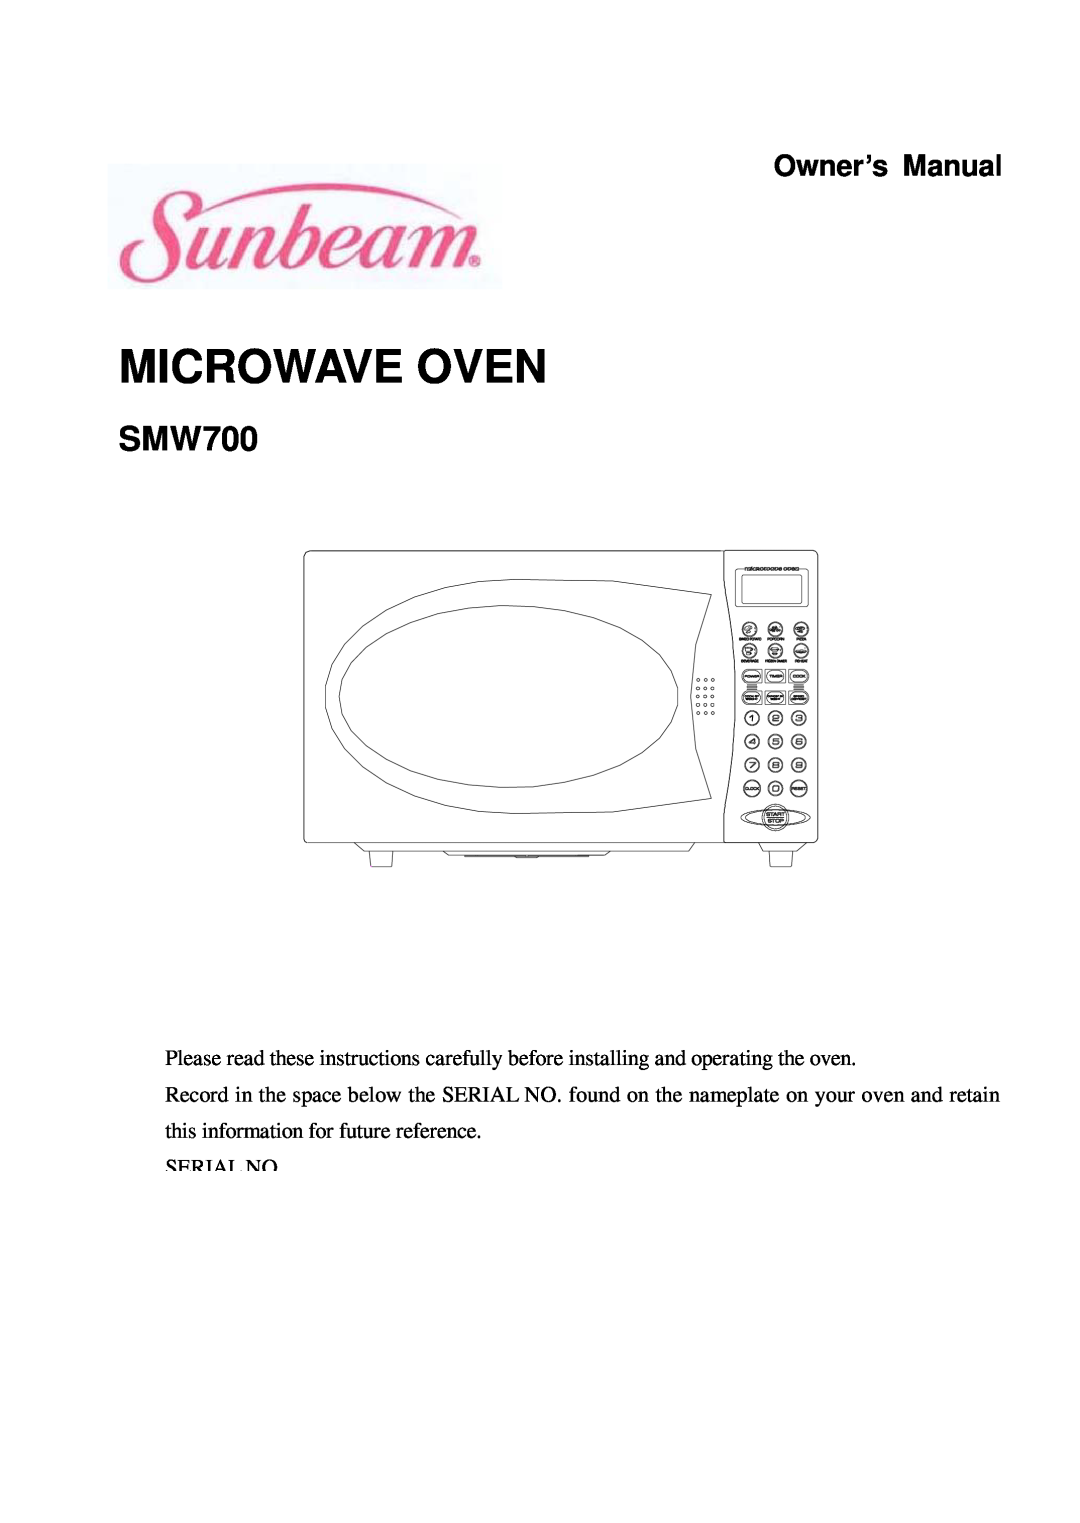 Sunbeam SMW700 owner manual Microwave Oven 